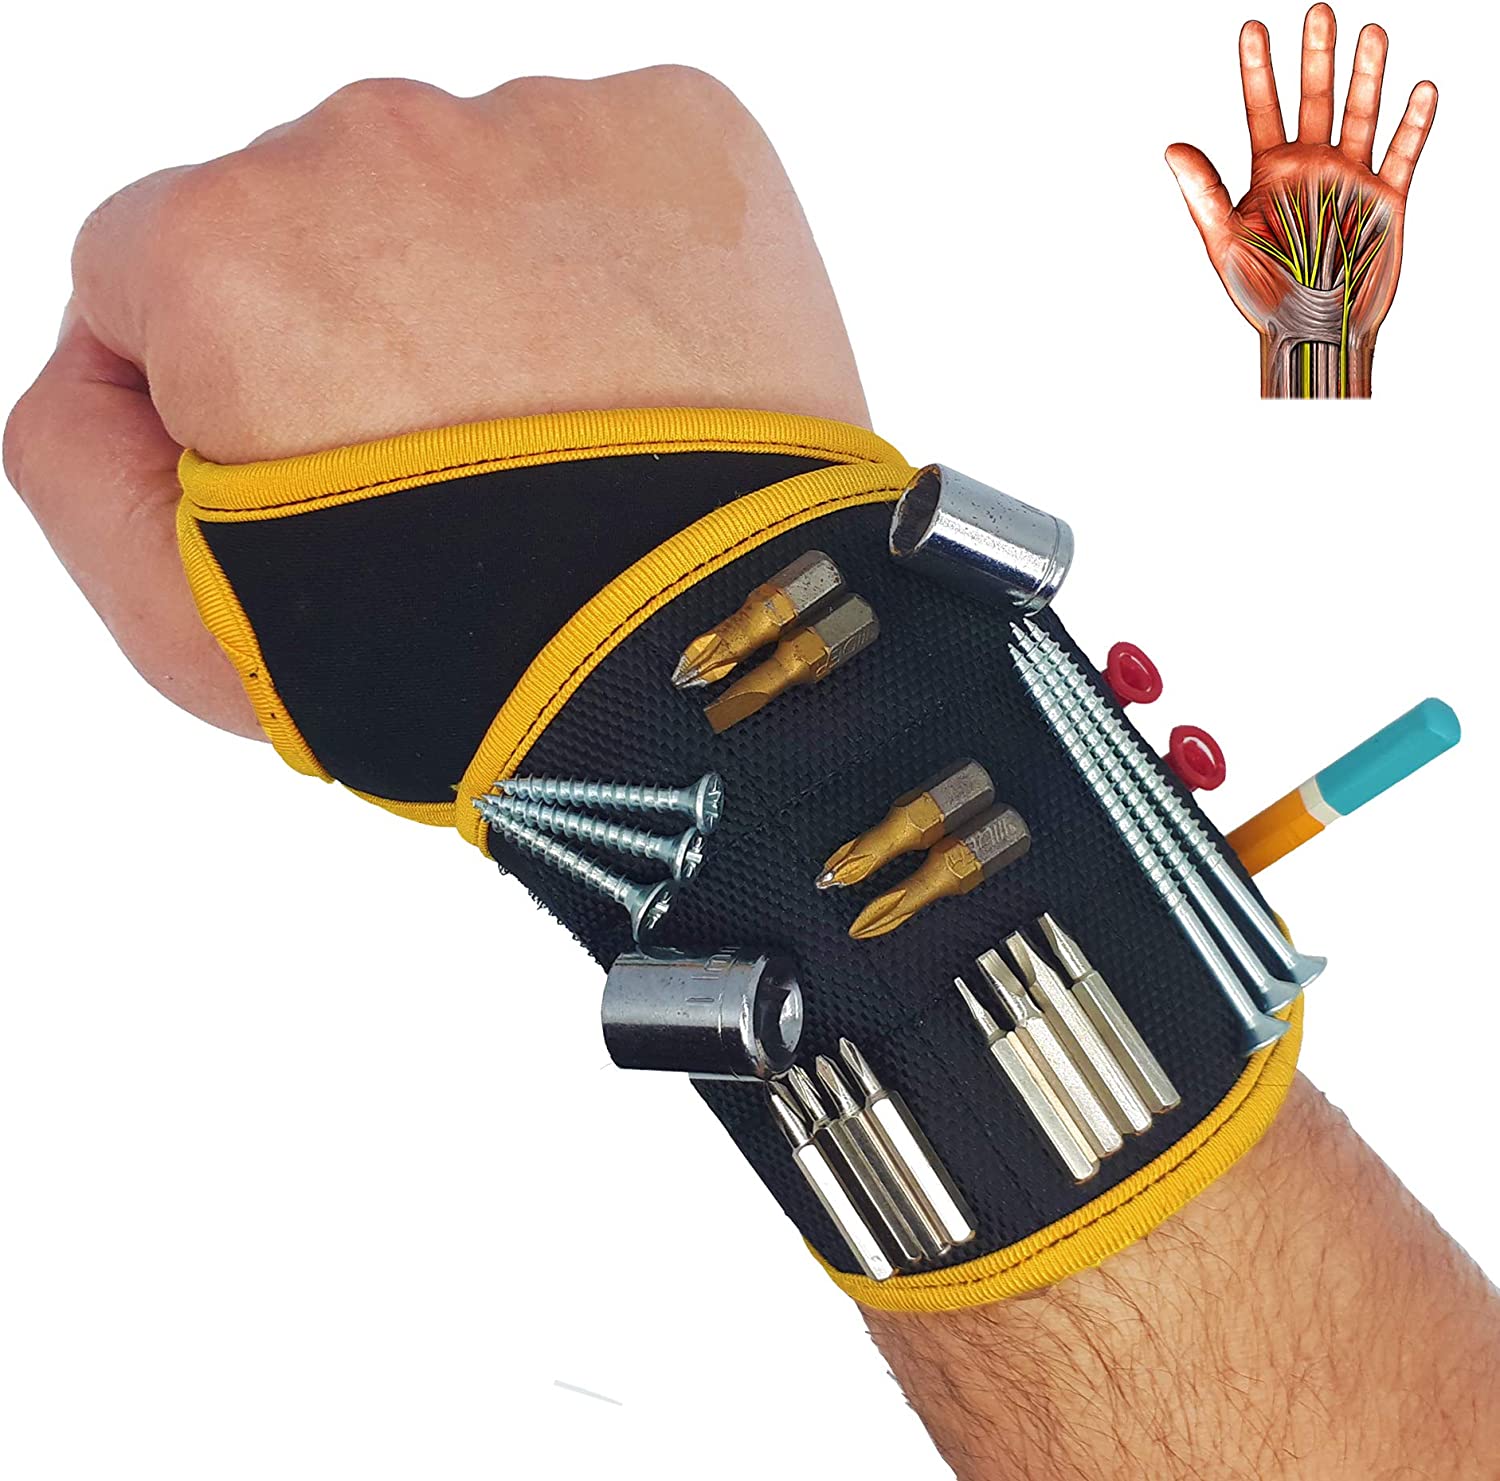 BINYATOOLS Magnetic Wristband -Black- With Super Strong Magnets Holds Screws, Nails, Drill Bit. Unique Wrist Support Design Cool Handy Gadget Gifts for Fathers, Boyfriends, Handyman, Electrician